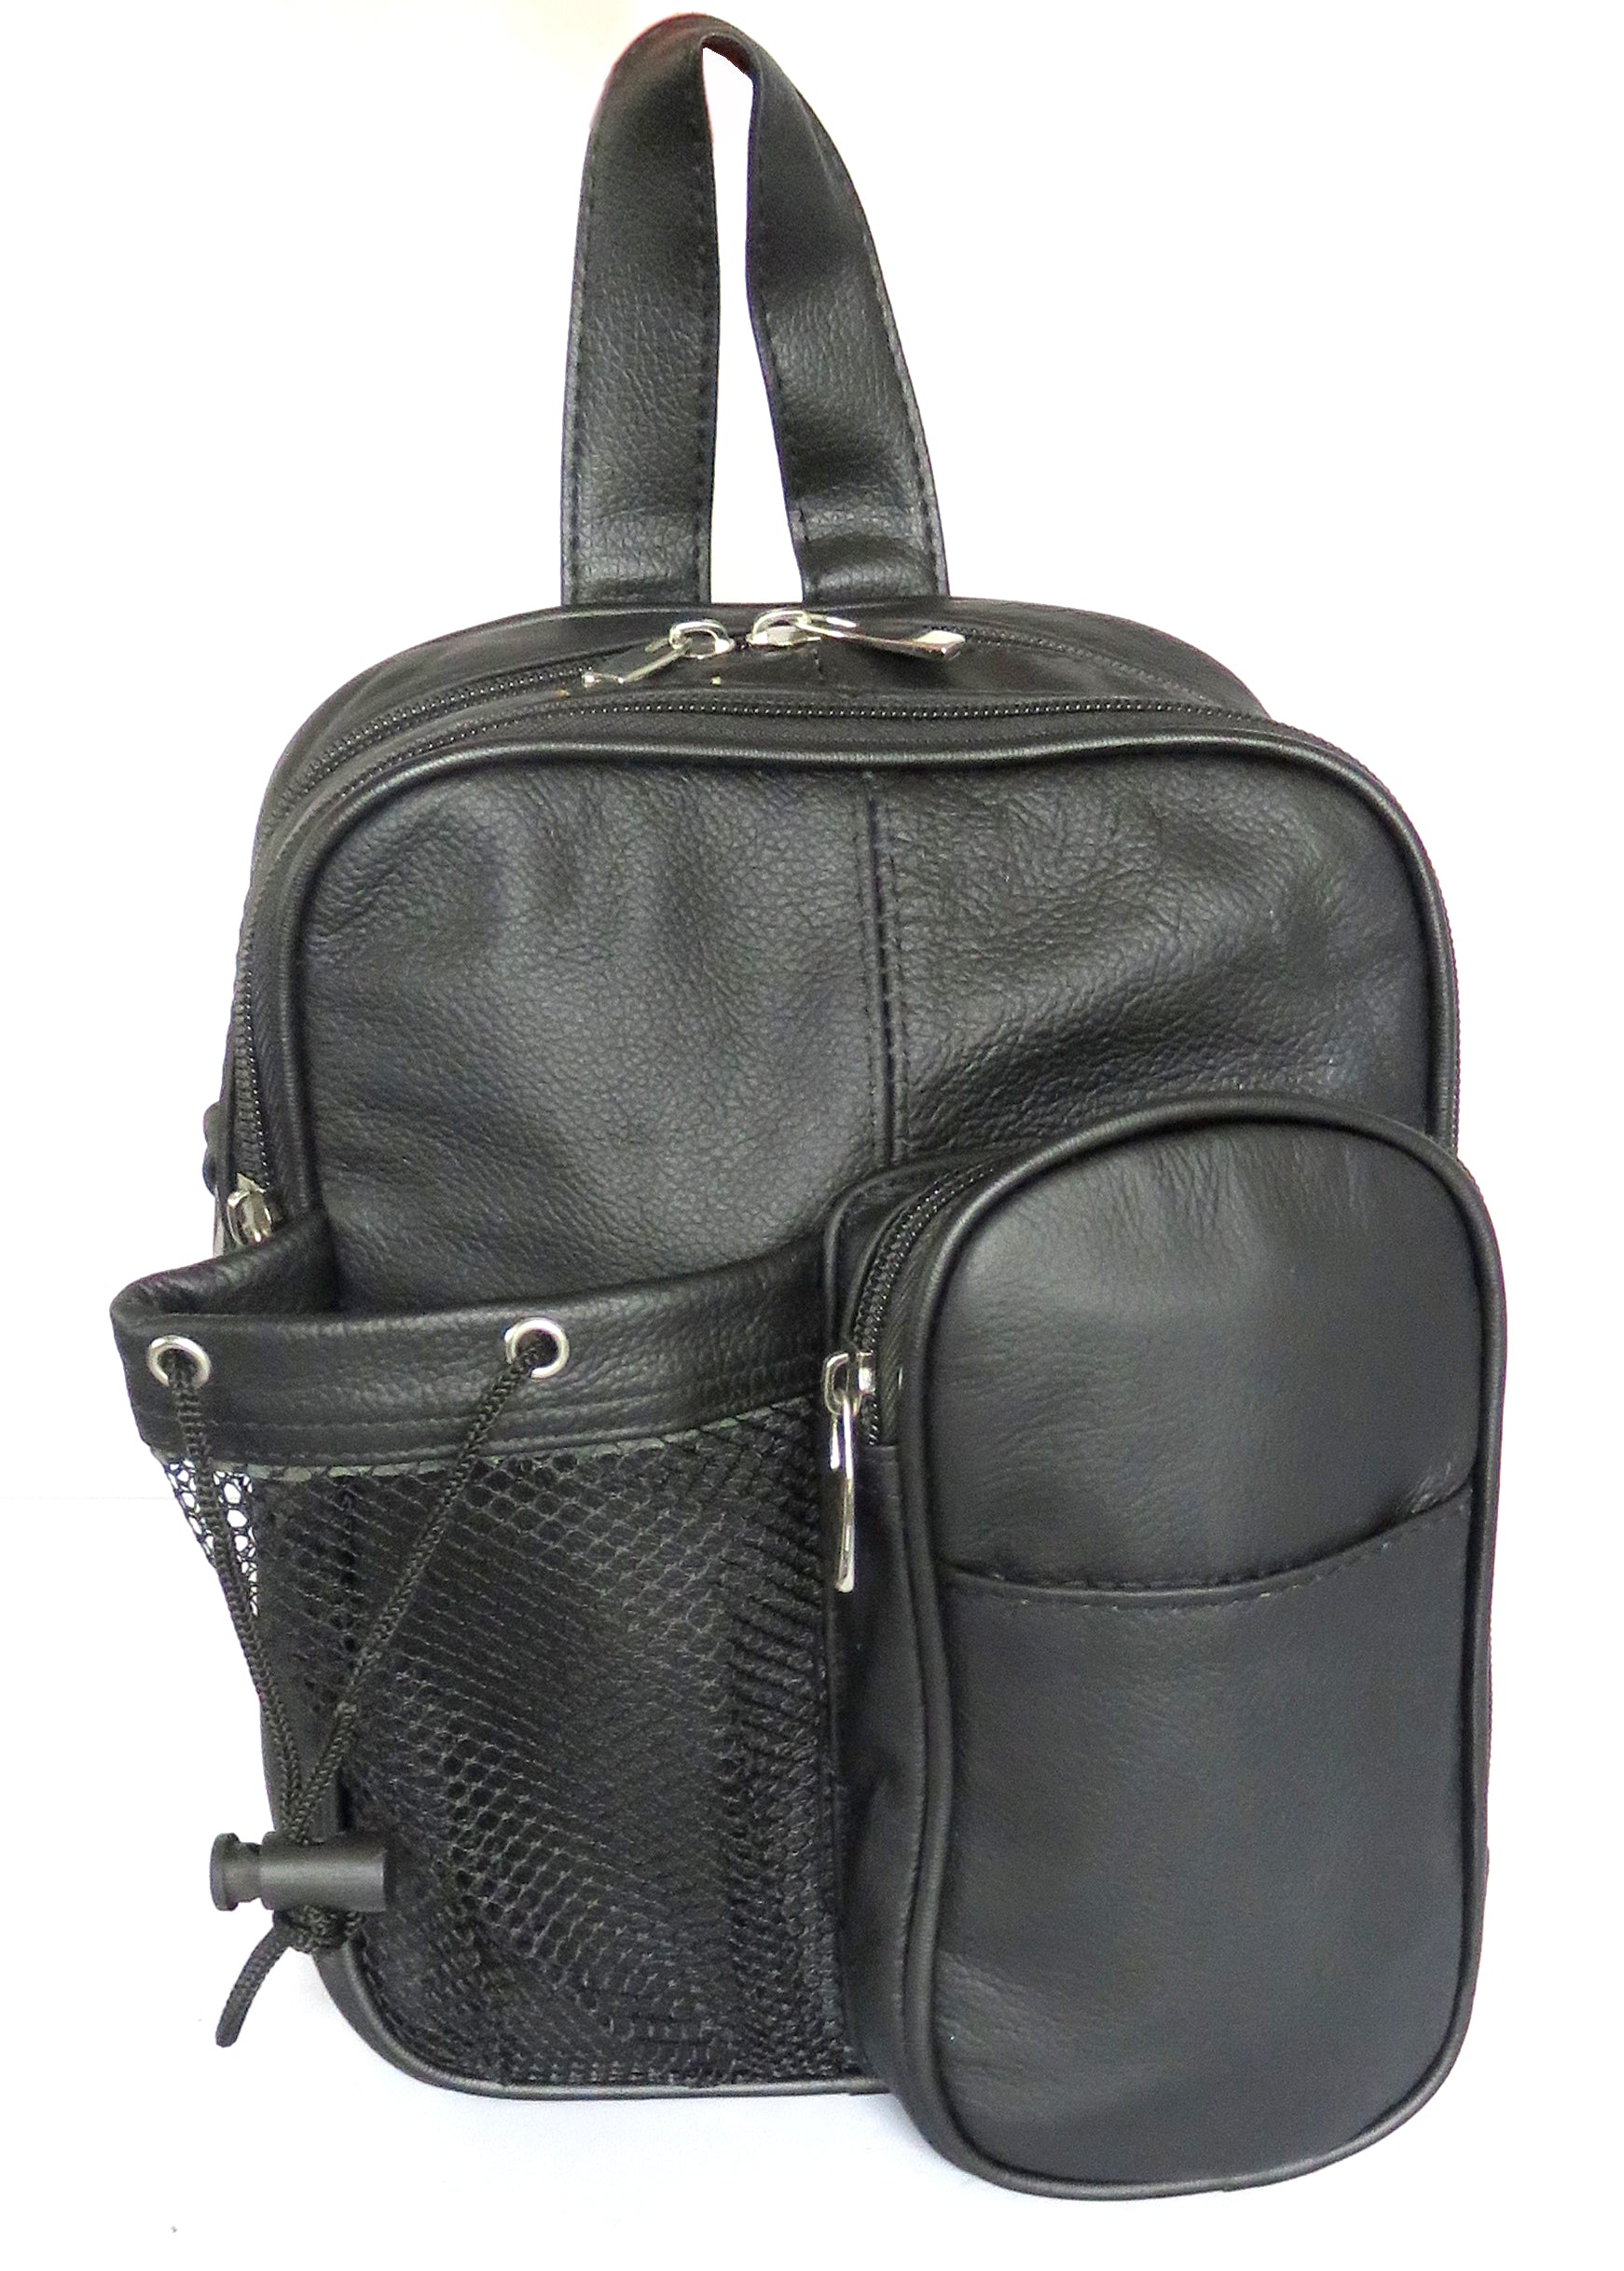 Unisex Genuine Leather Carry On Bag